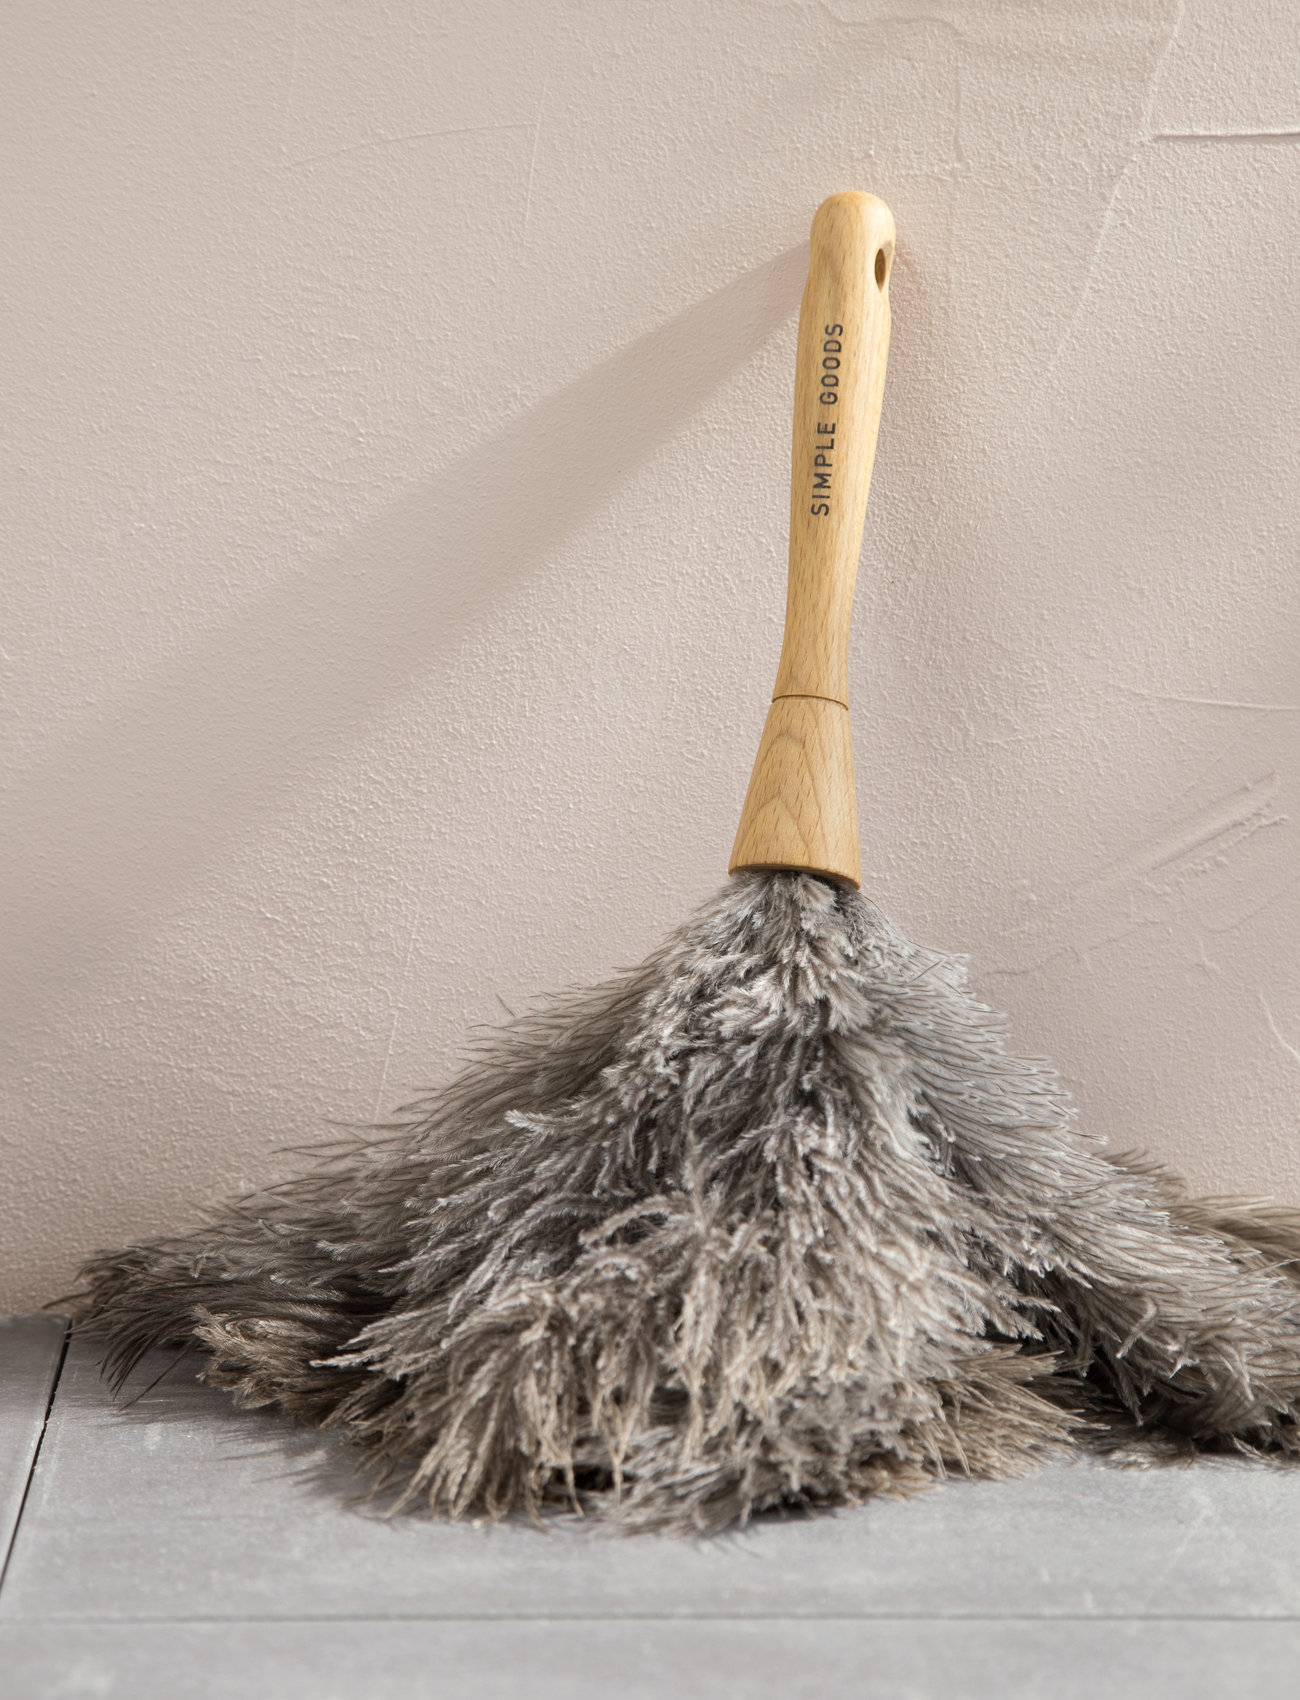 Simple Goods - Duster Ostrich Feathers - mažiausios kainos - grey / wood - 1